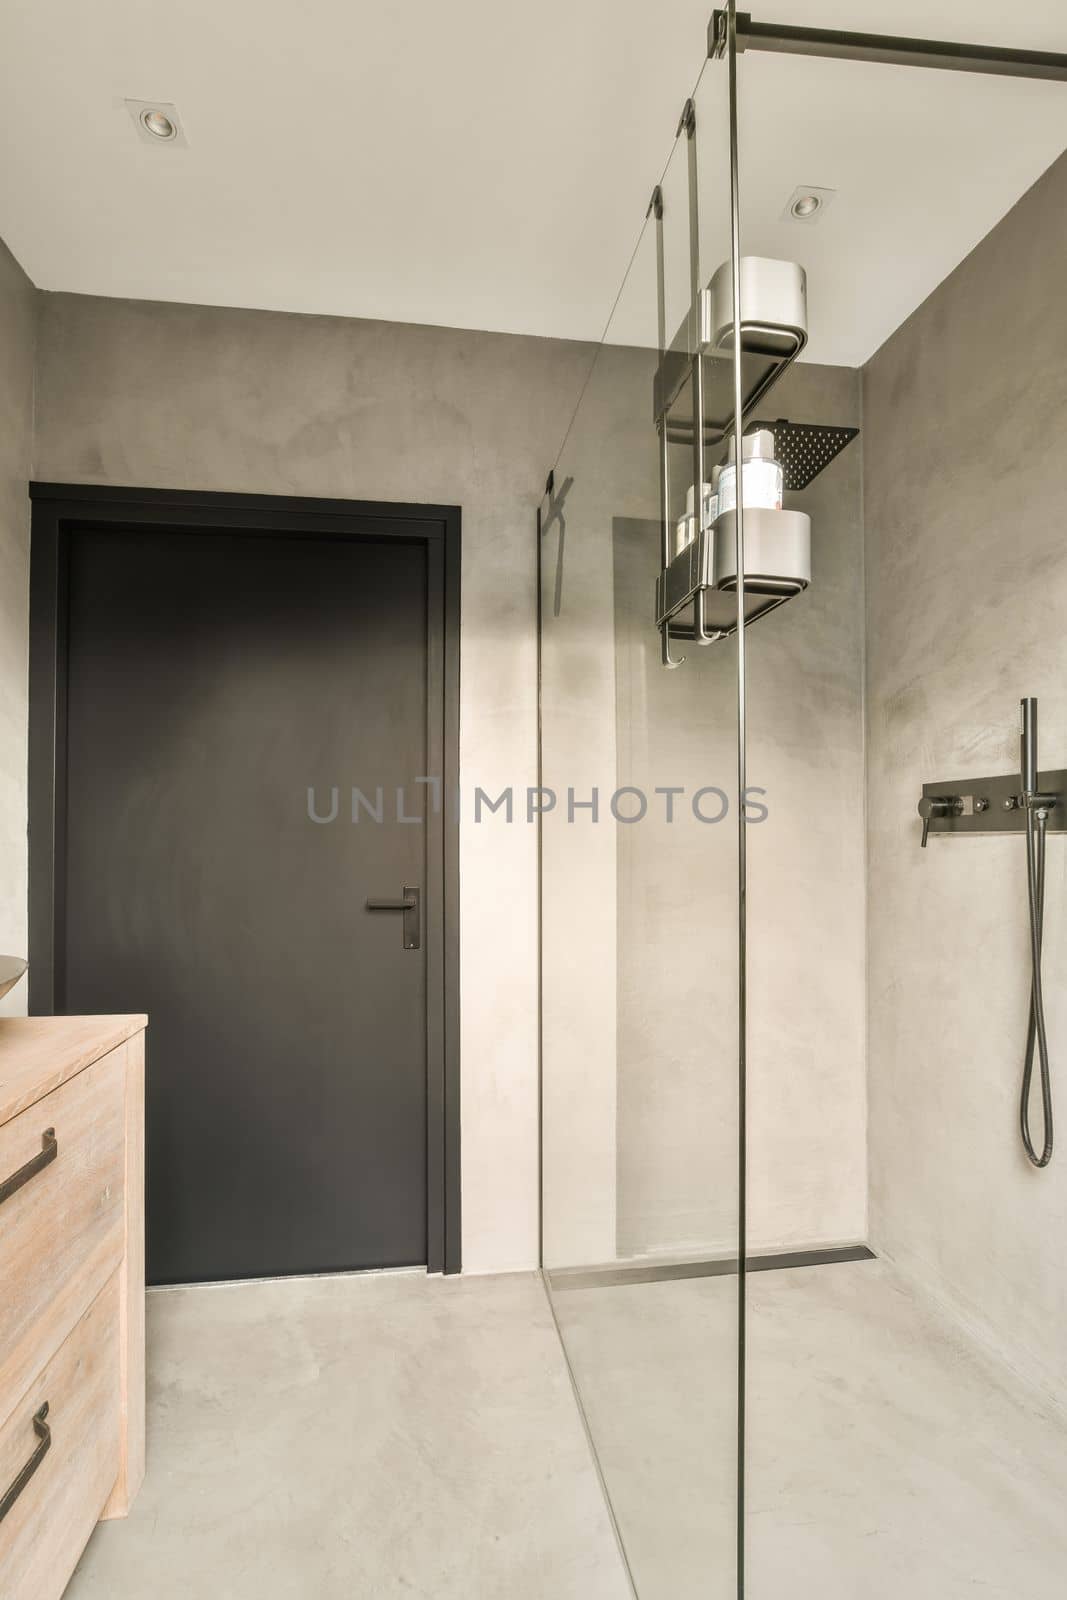 a bathroom that is very clean and ready to be used as a walk - in shower or wet room for use